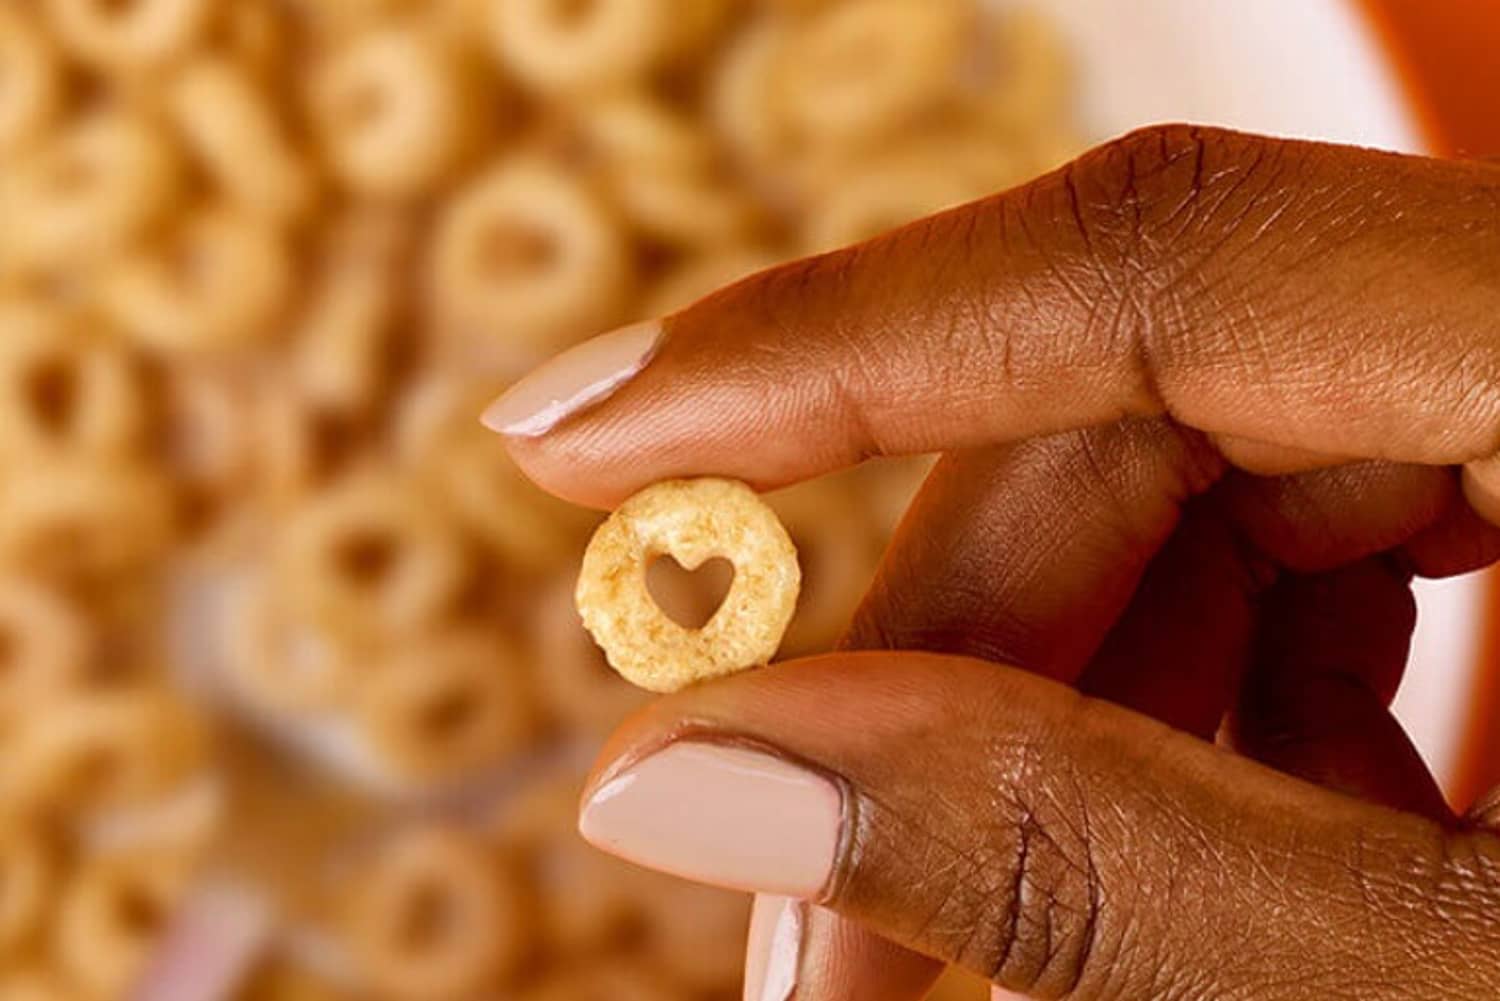 A hand holding a single Cheerio with a heart center in focus